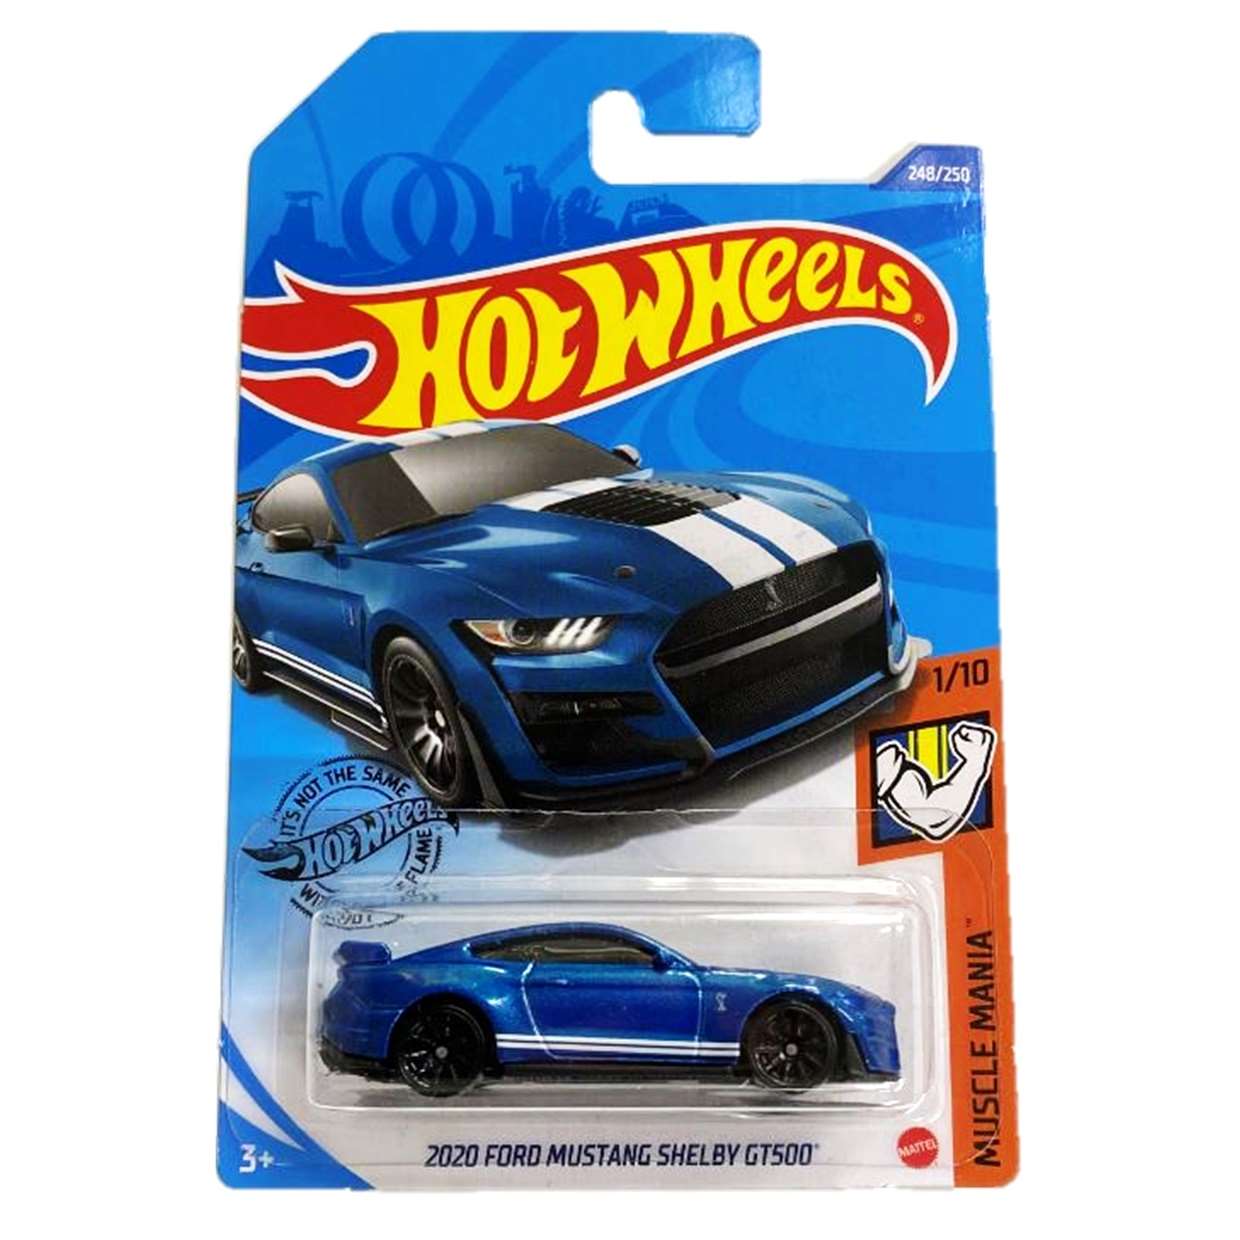 2020 Ford Mustang Shelby Gt500 1/10 Hot Wheels Muscle Mania